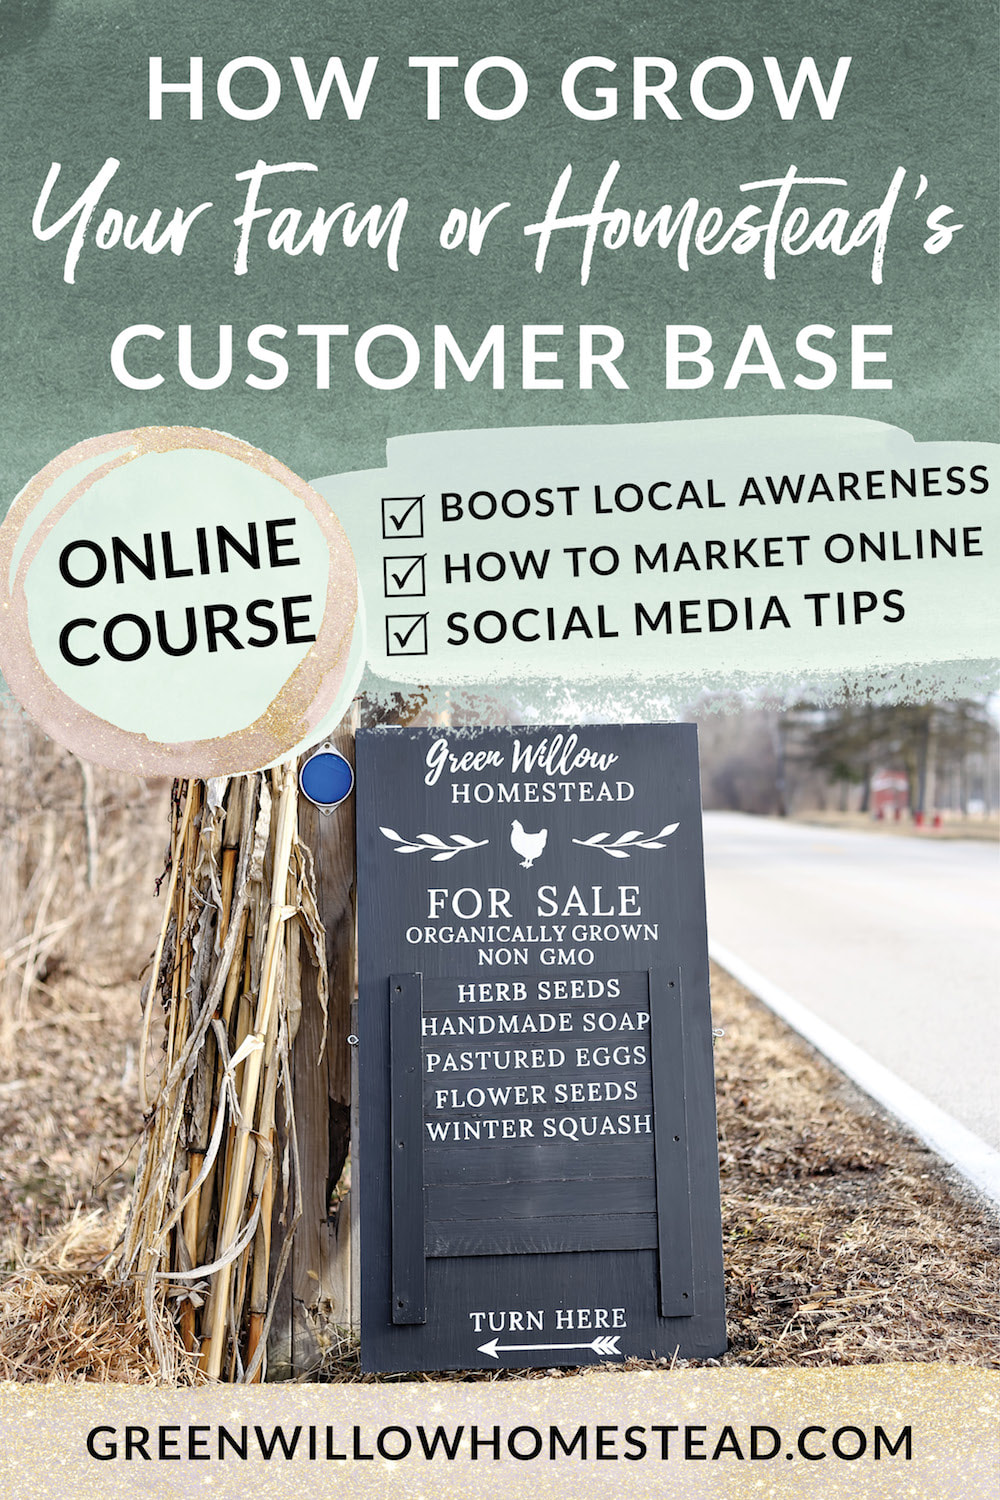 How to use online marketing for your farm or homestead business